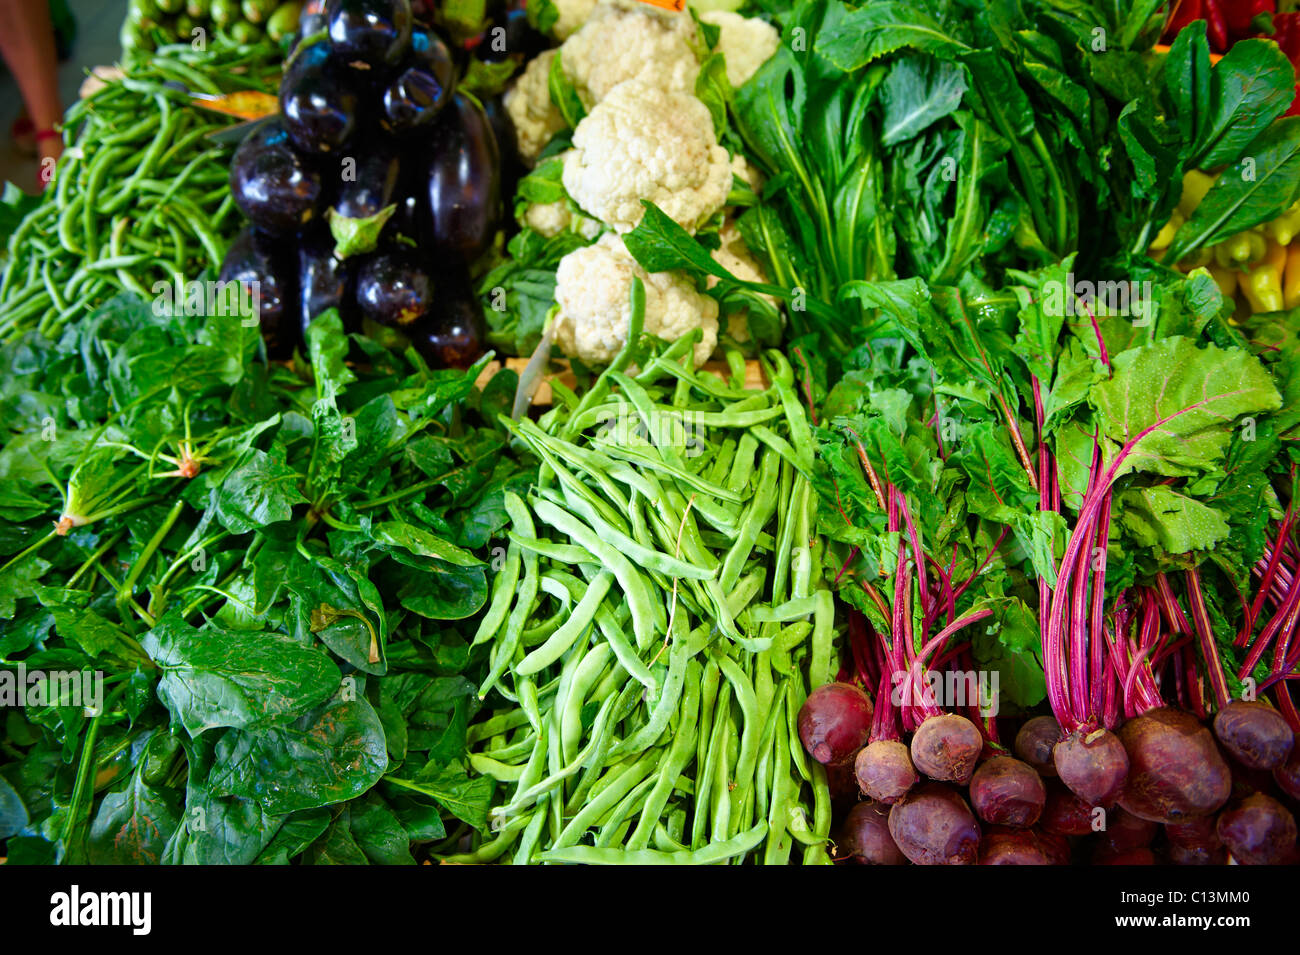 Fresh vegetables on a market stall in a market Stock Photo